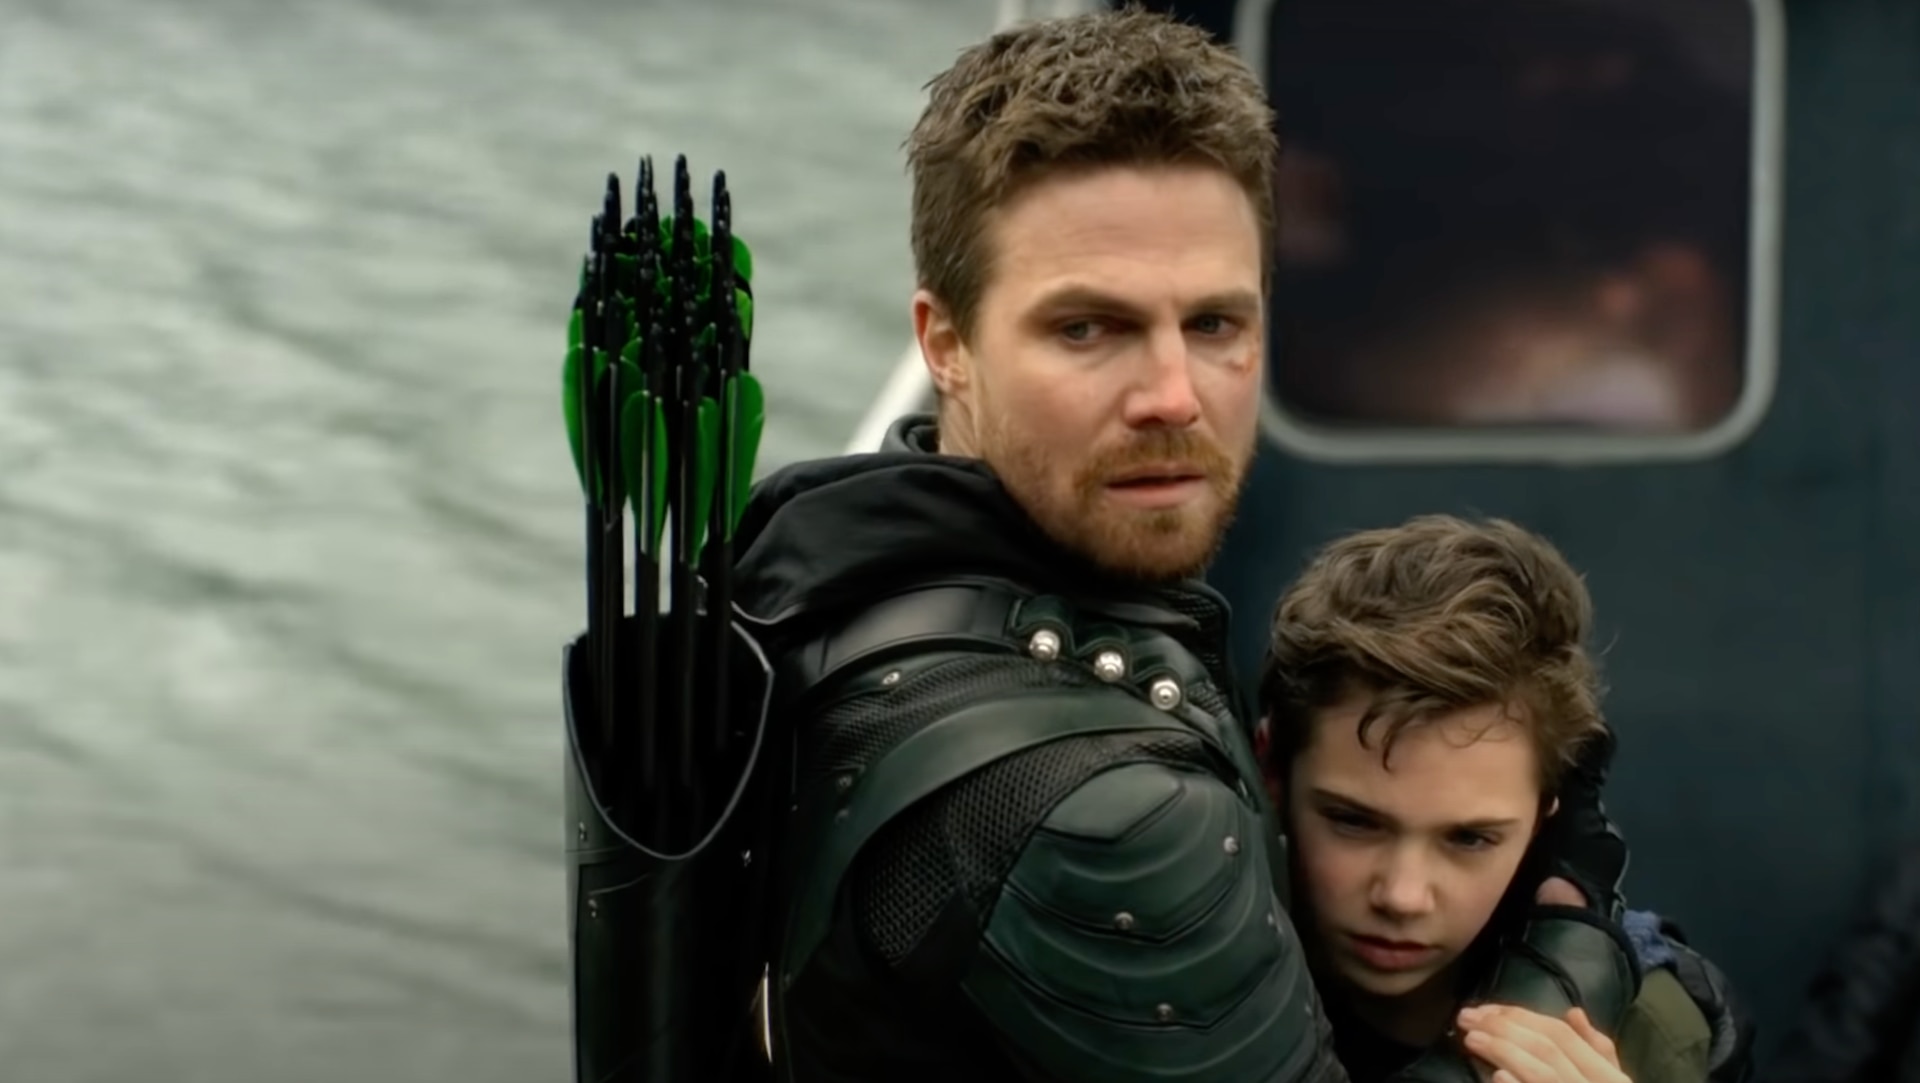 Stephen Amell open to Arrowverse return ‘in any way, shape or form’